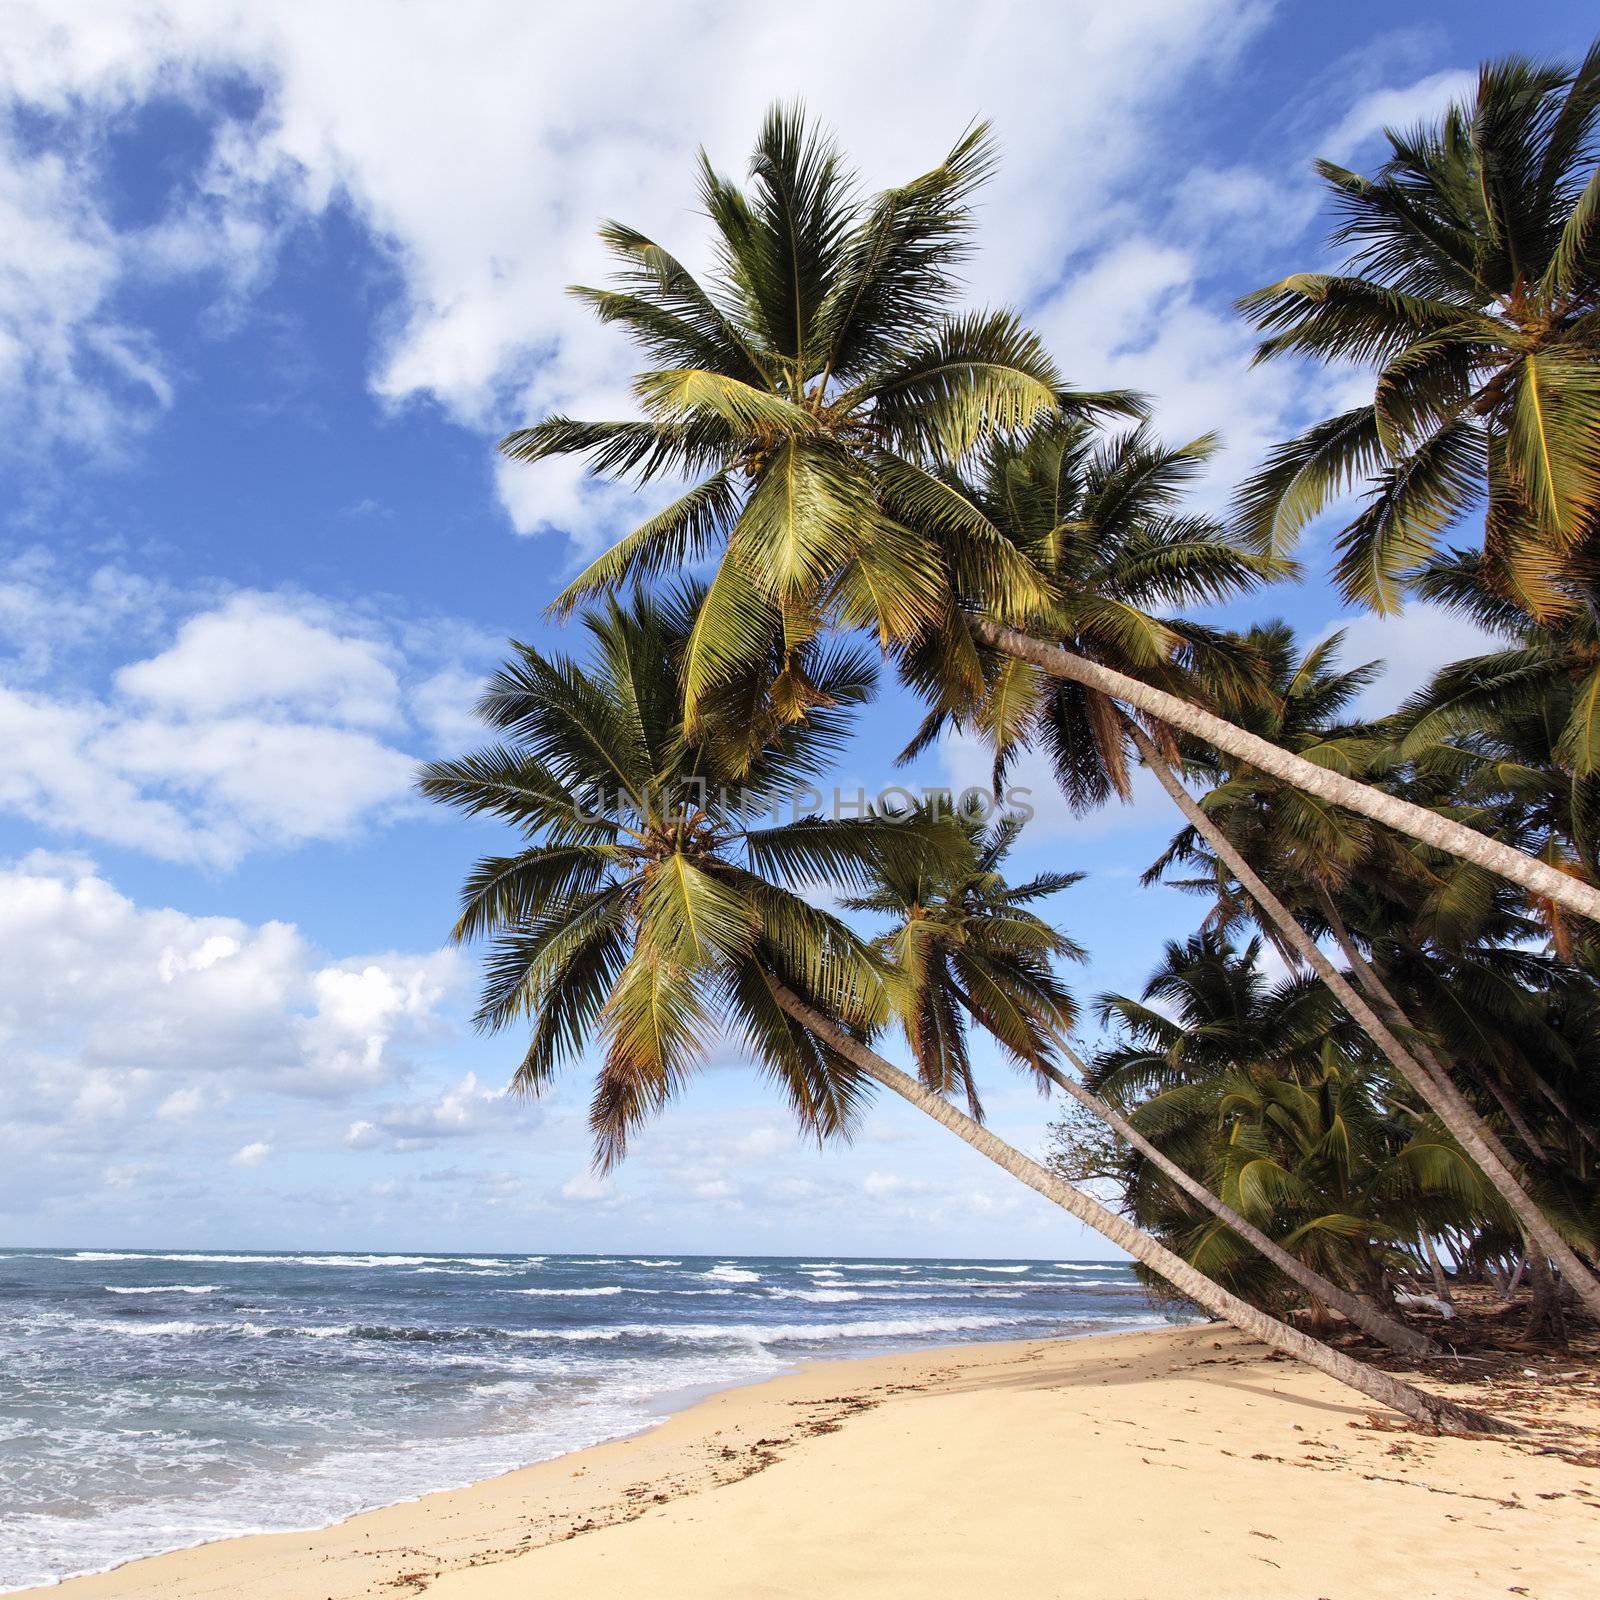 beautiful caribbean beach with palm trees in summer